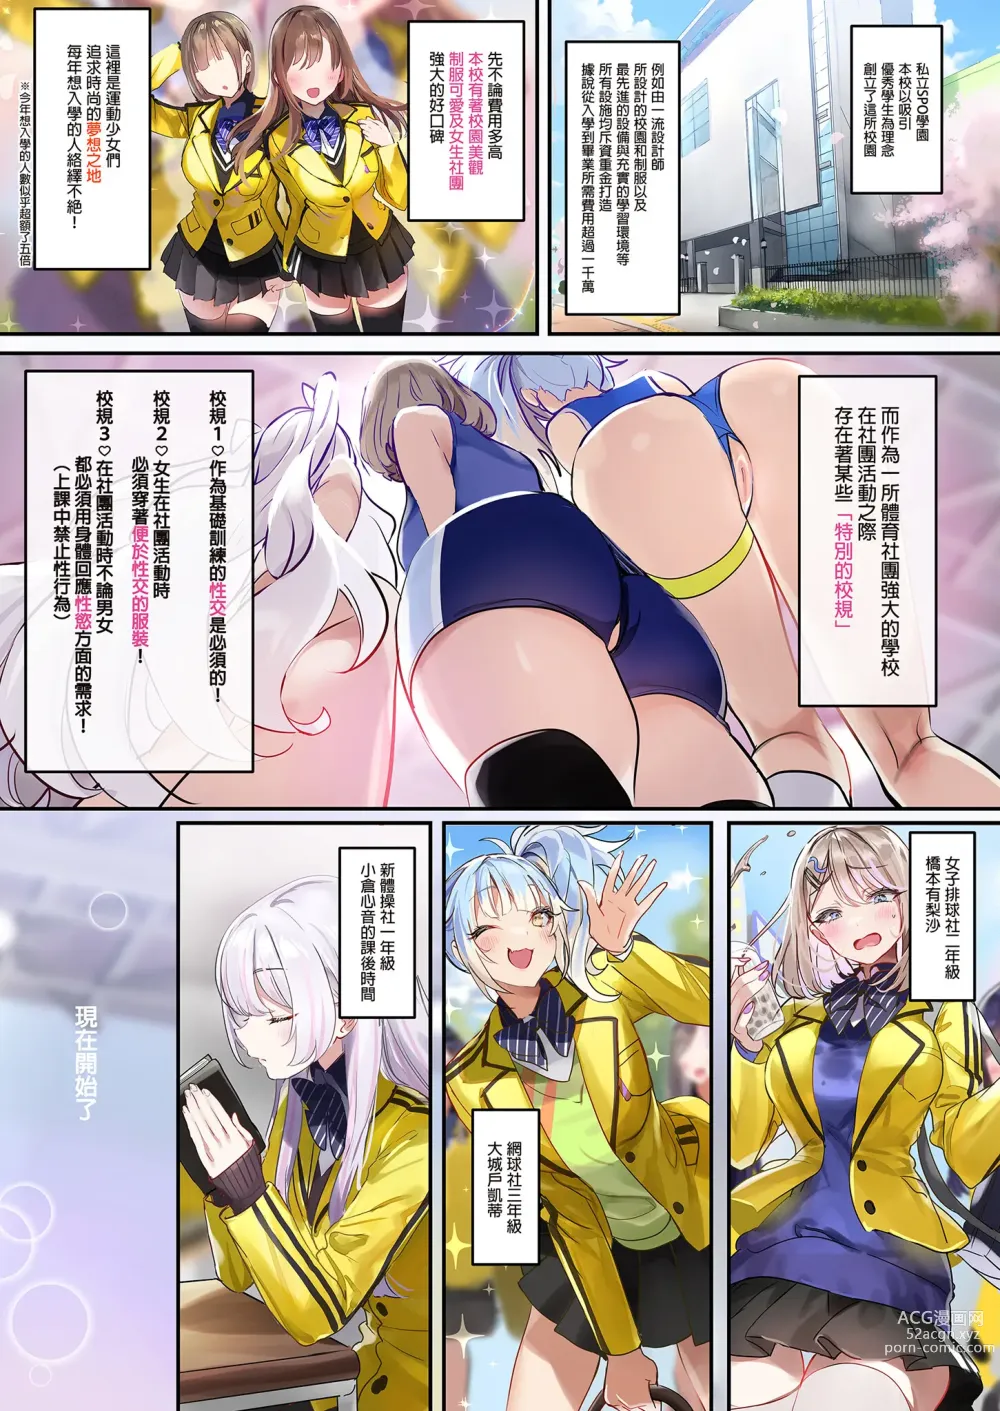 Page 39 of doujinshi 愛上運動1,2,3! (decensored)